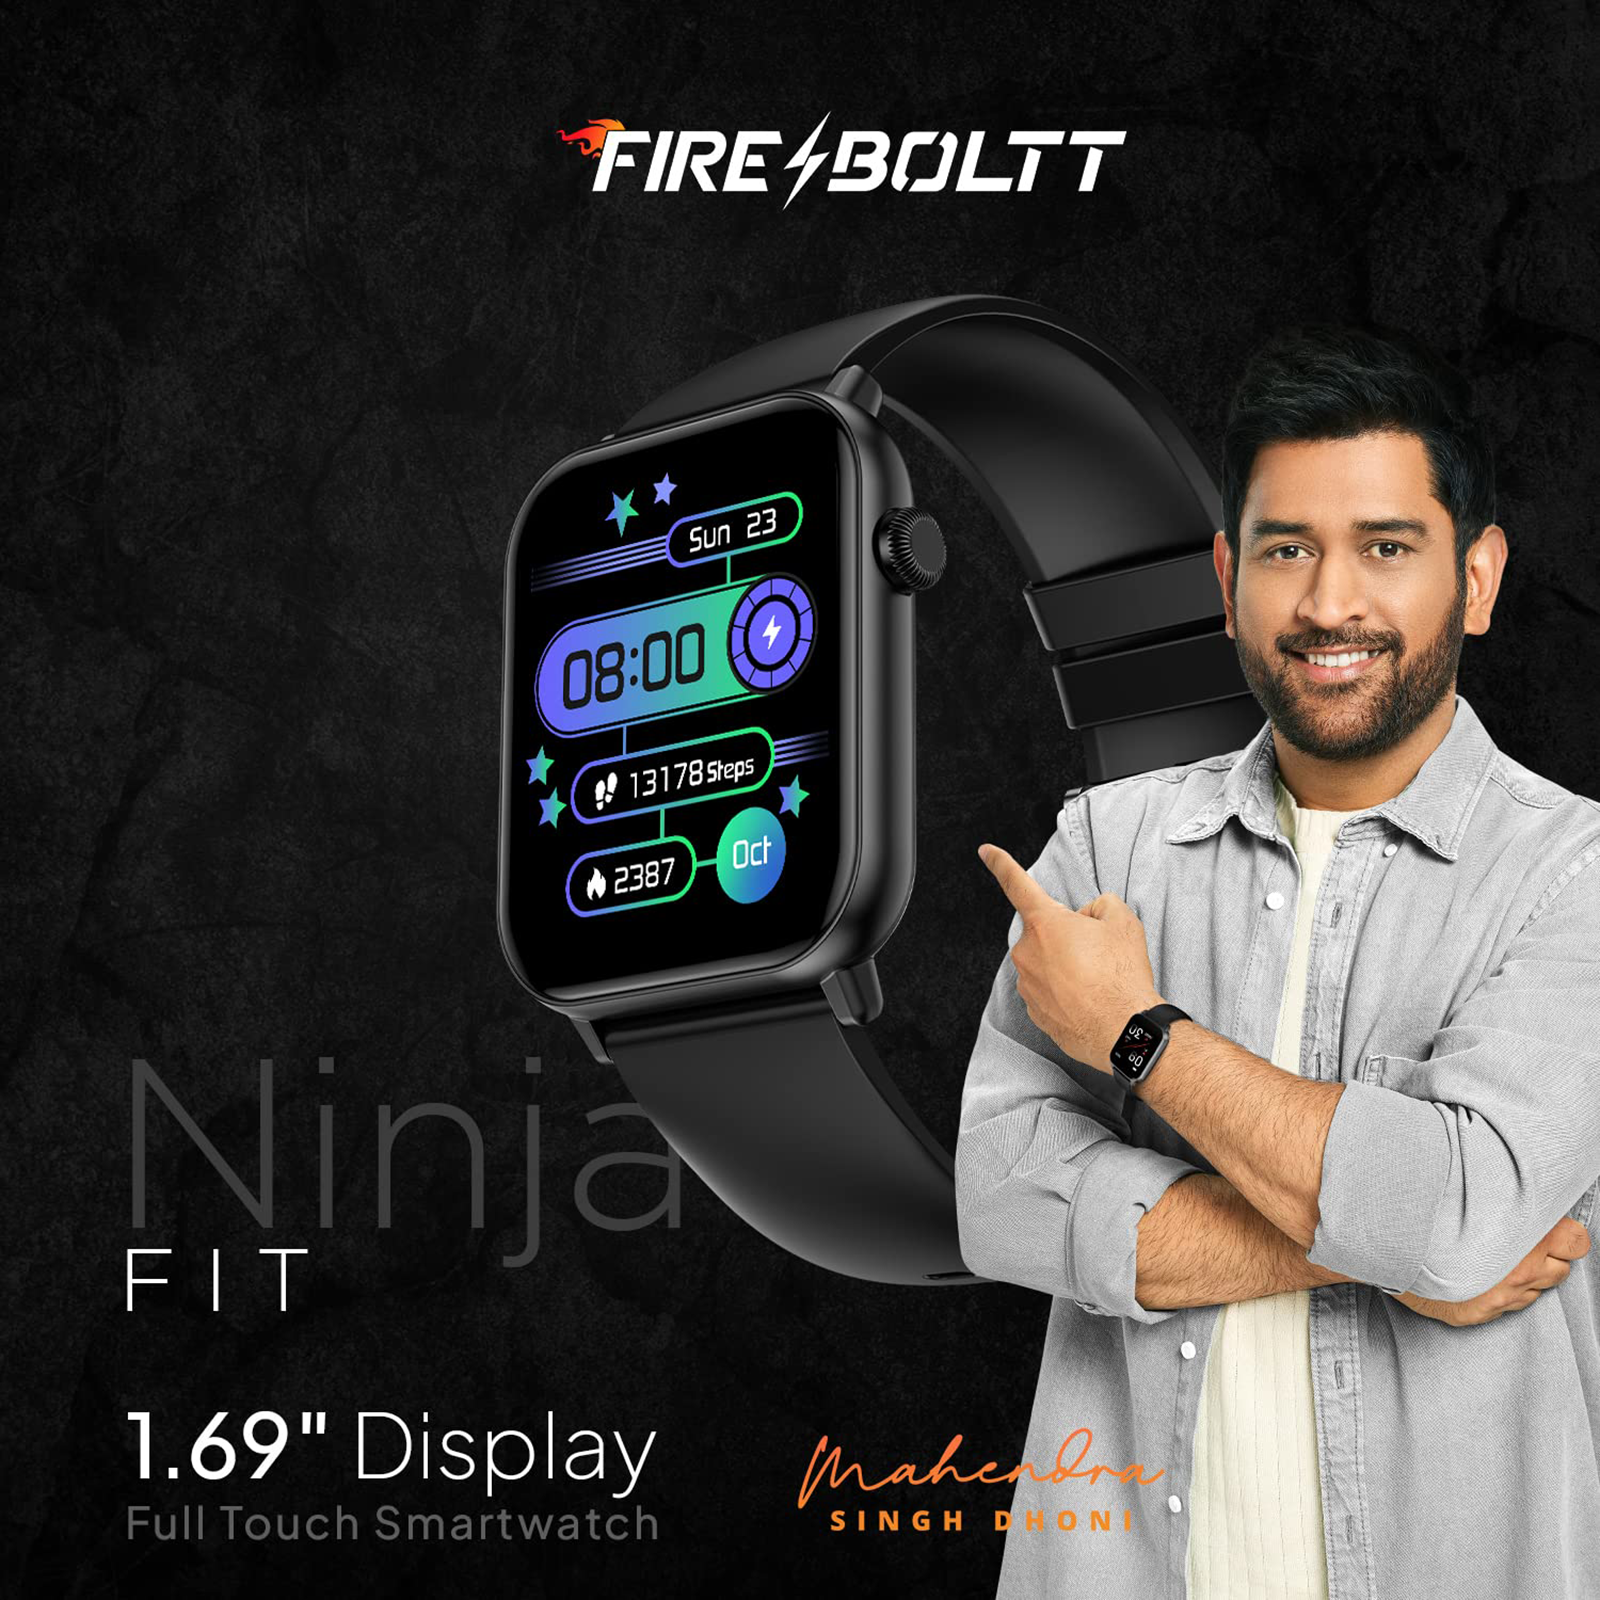 Fire-Boltt Ninja 2 Budget Smartwatch With 30 Sports Modes, SpO2 Tracking  Launched in India: Price, Specifications | Technology News